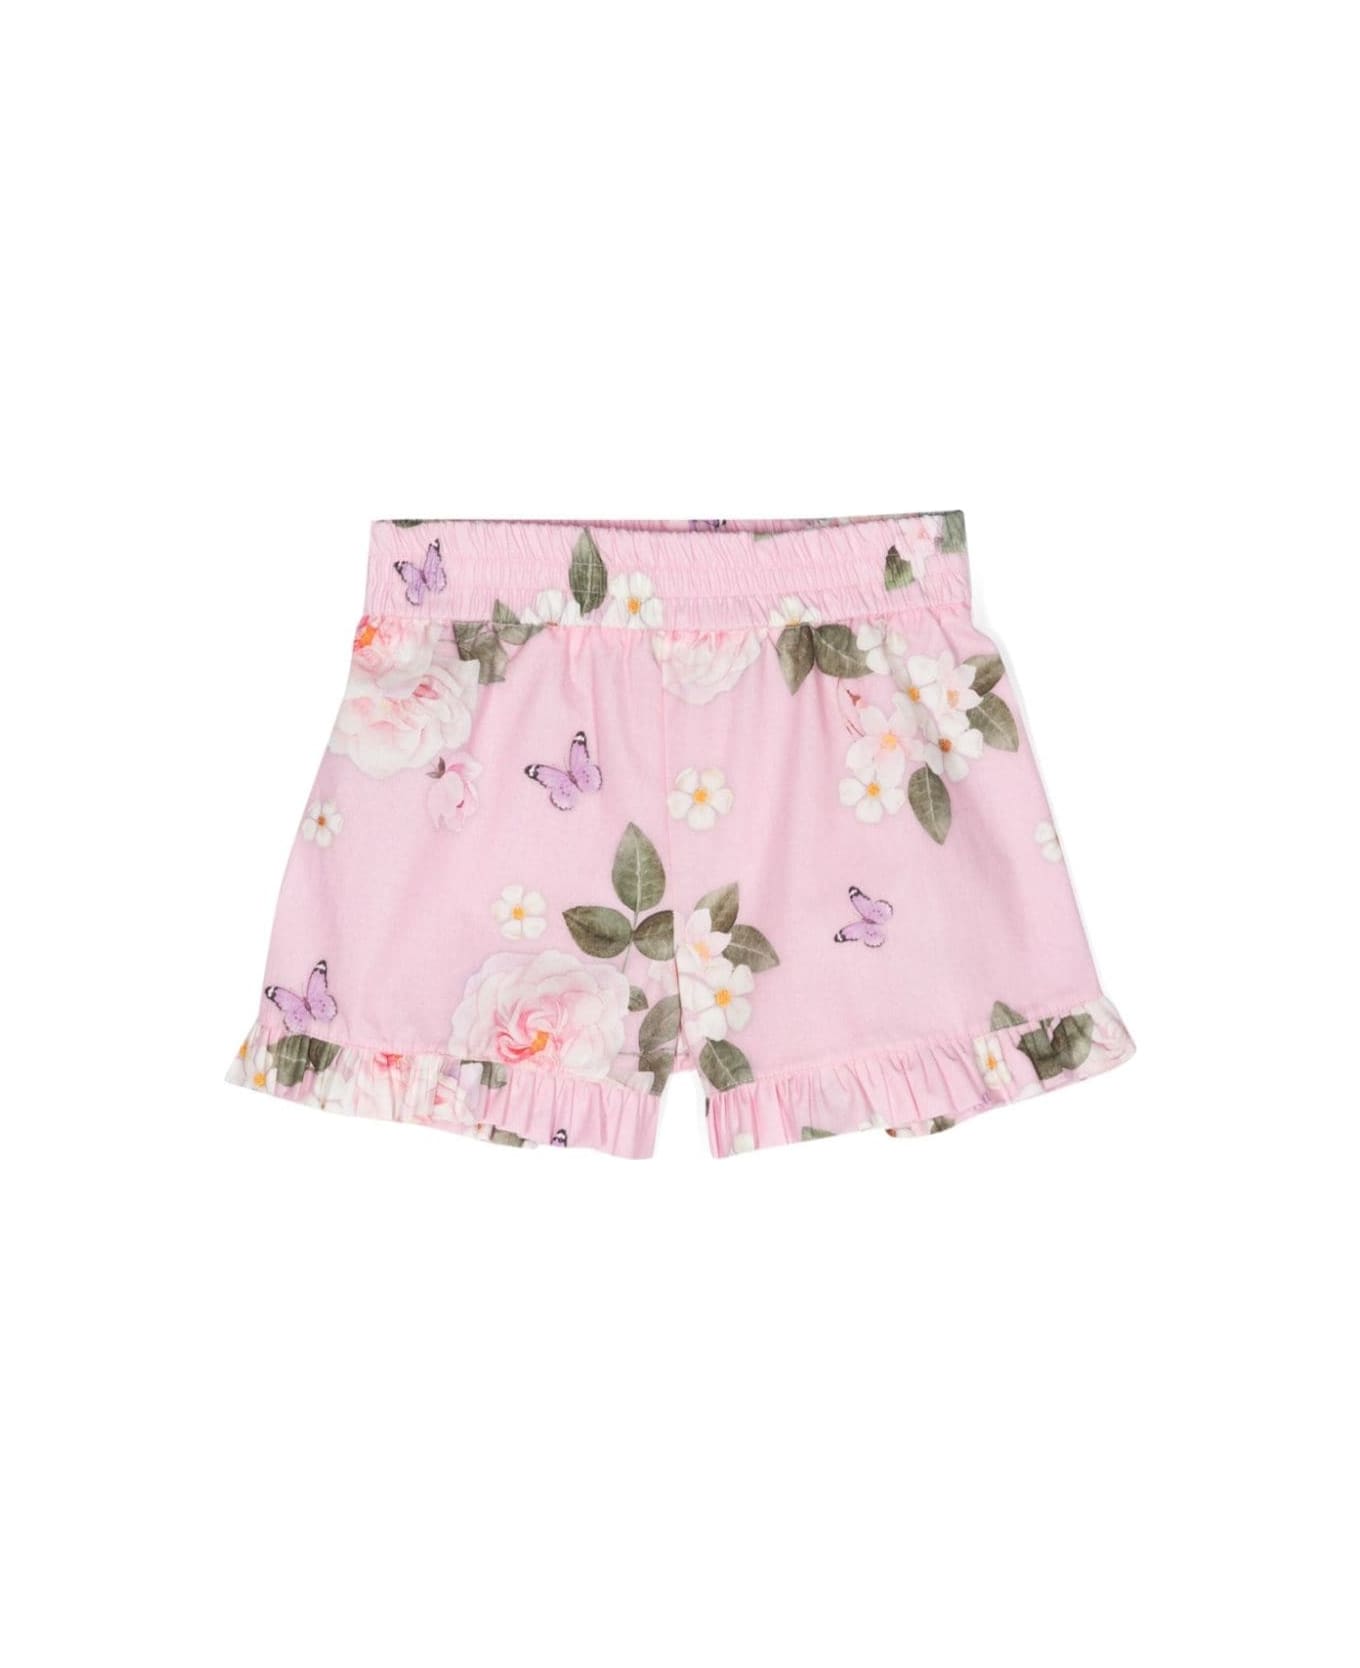 Monnalisa Pink Shorts With Floreal Print And Ruffles In Cotton Girl - Pink ボトムス